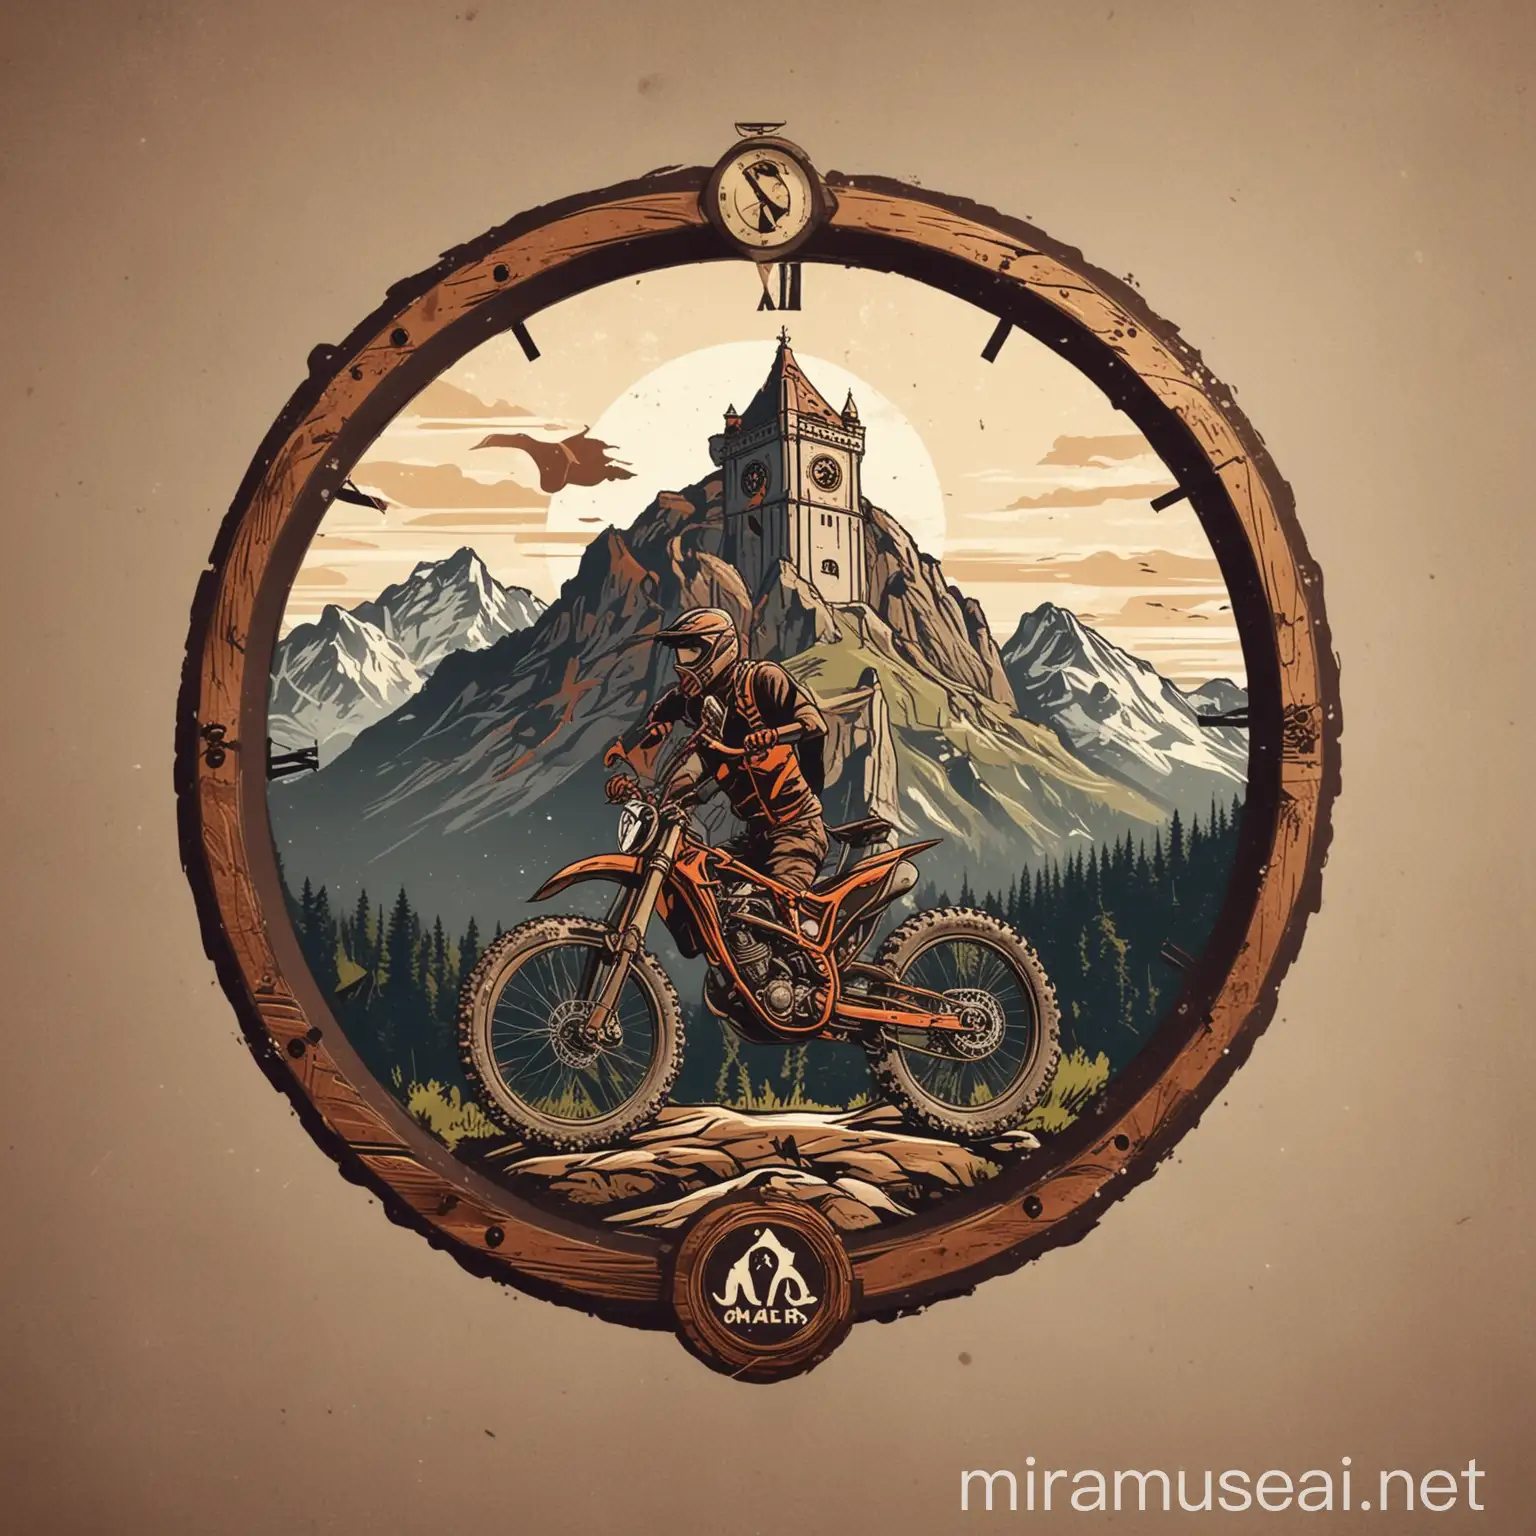 Make a logo. Enduro or cross-country bike. Clock tower behind. There are mountains in the background. logo in circle